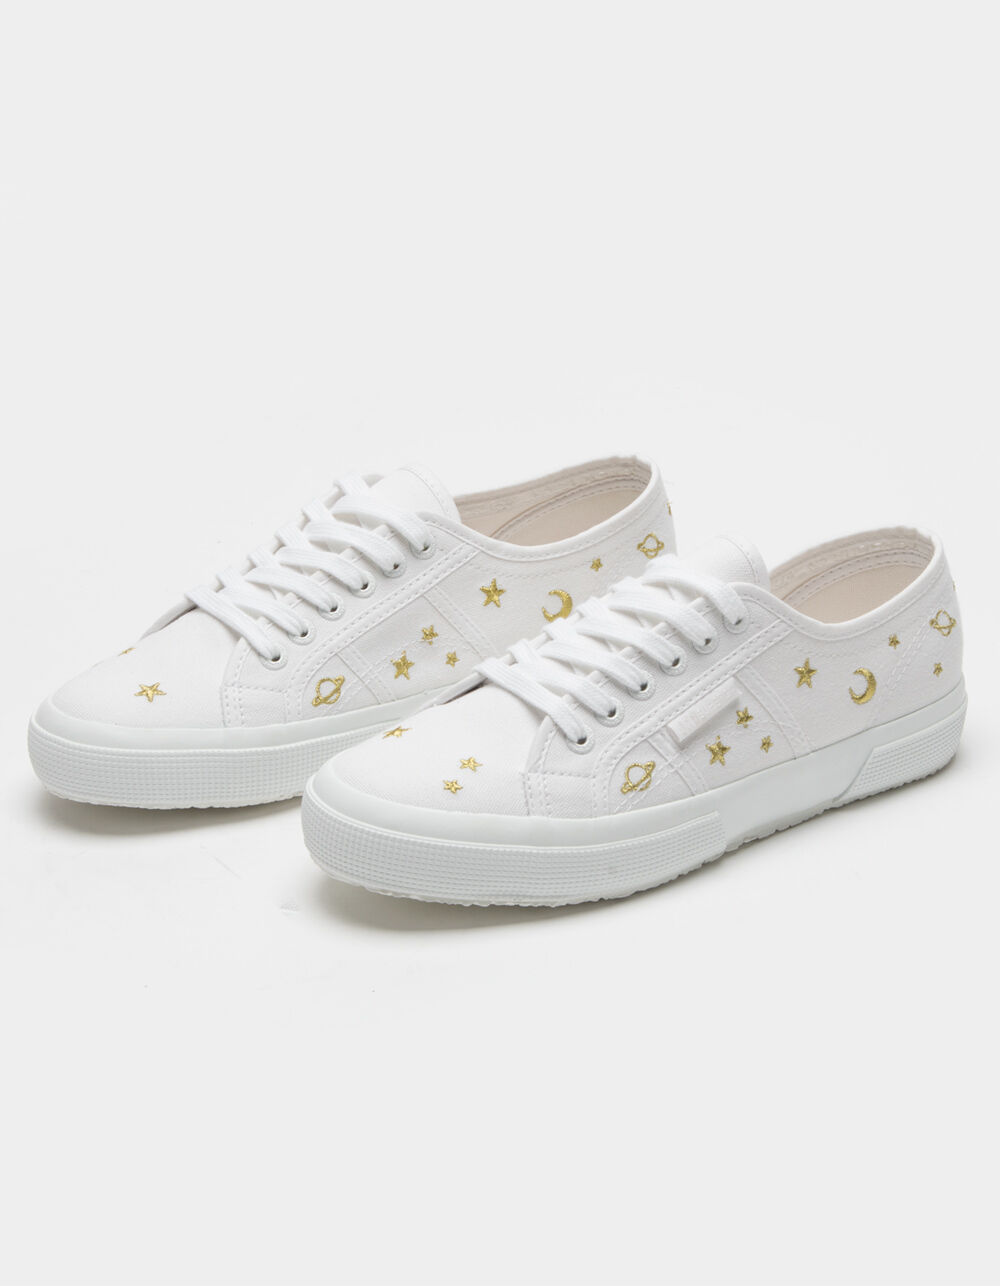 SUPERGA 2750 - Embroidery Womens Shoes - WHITE COMBO | Tillys